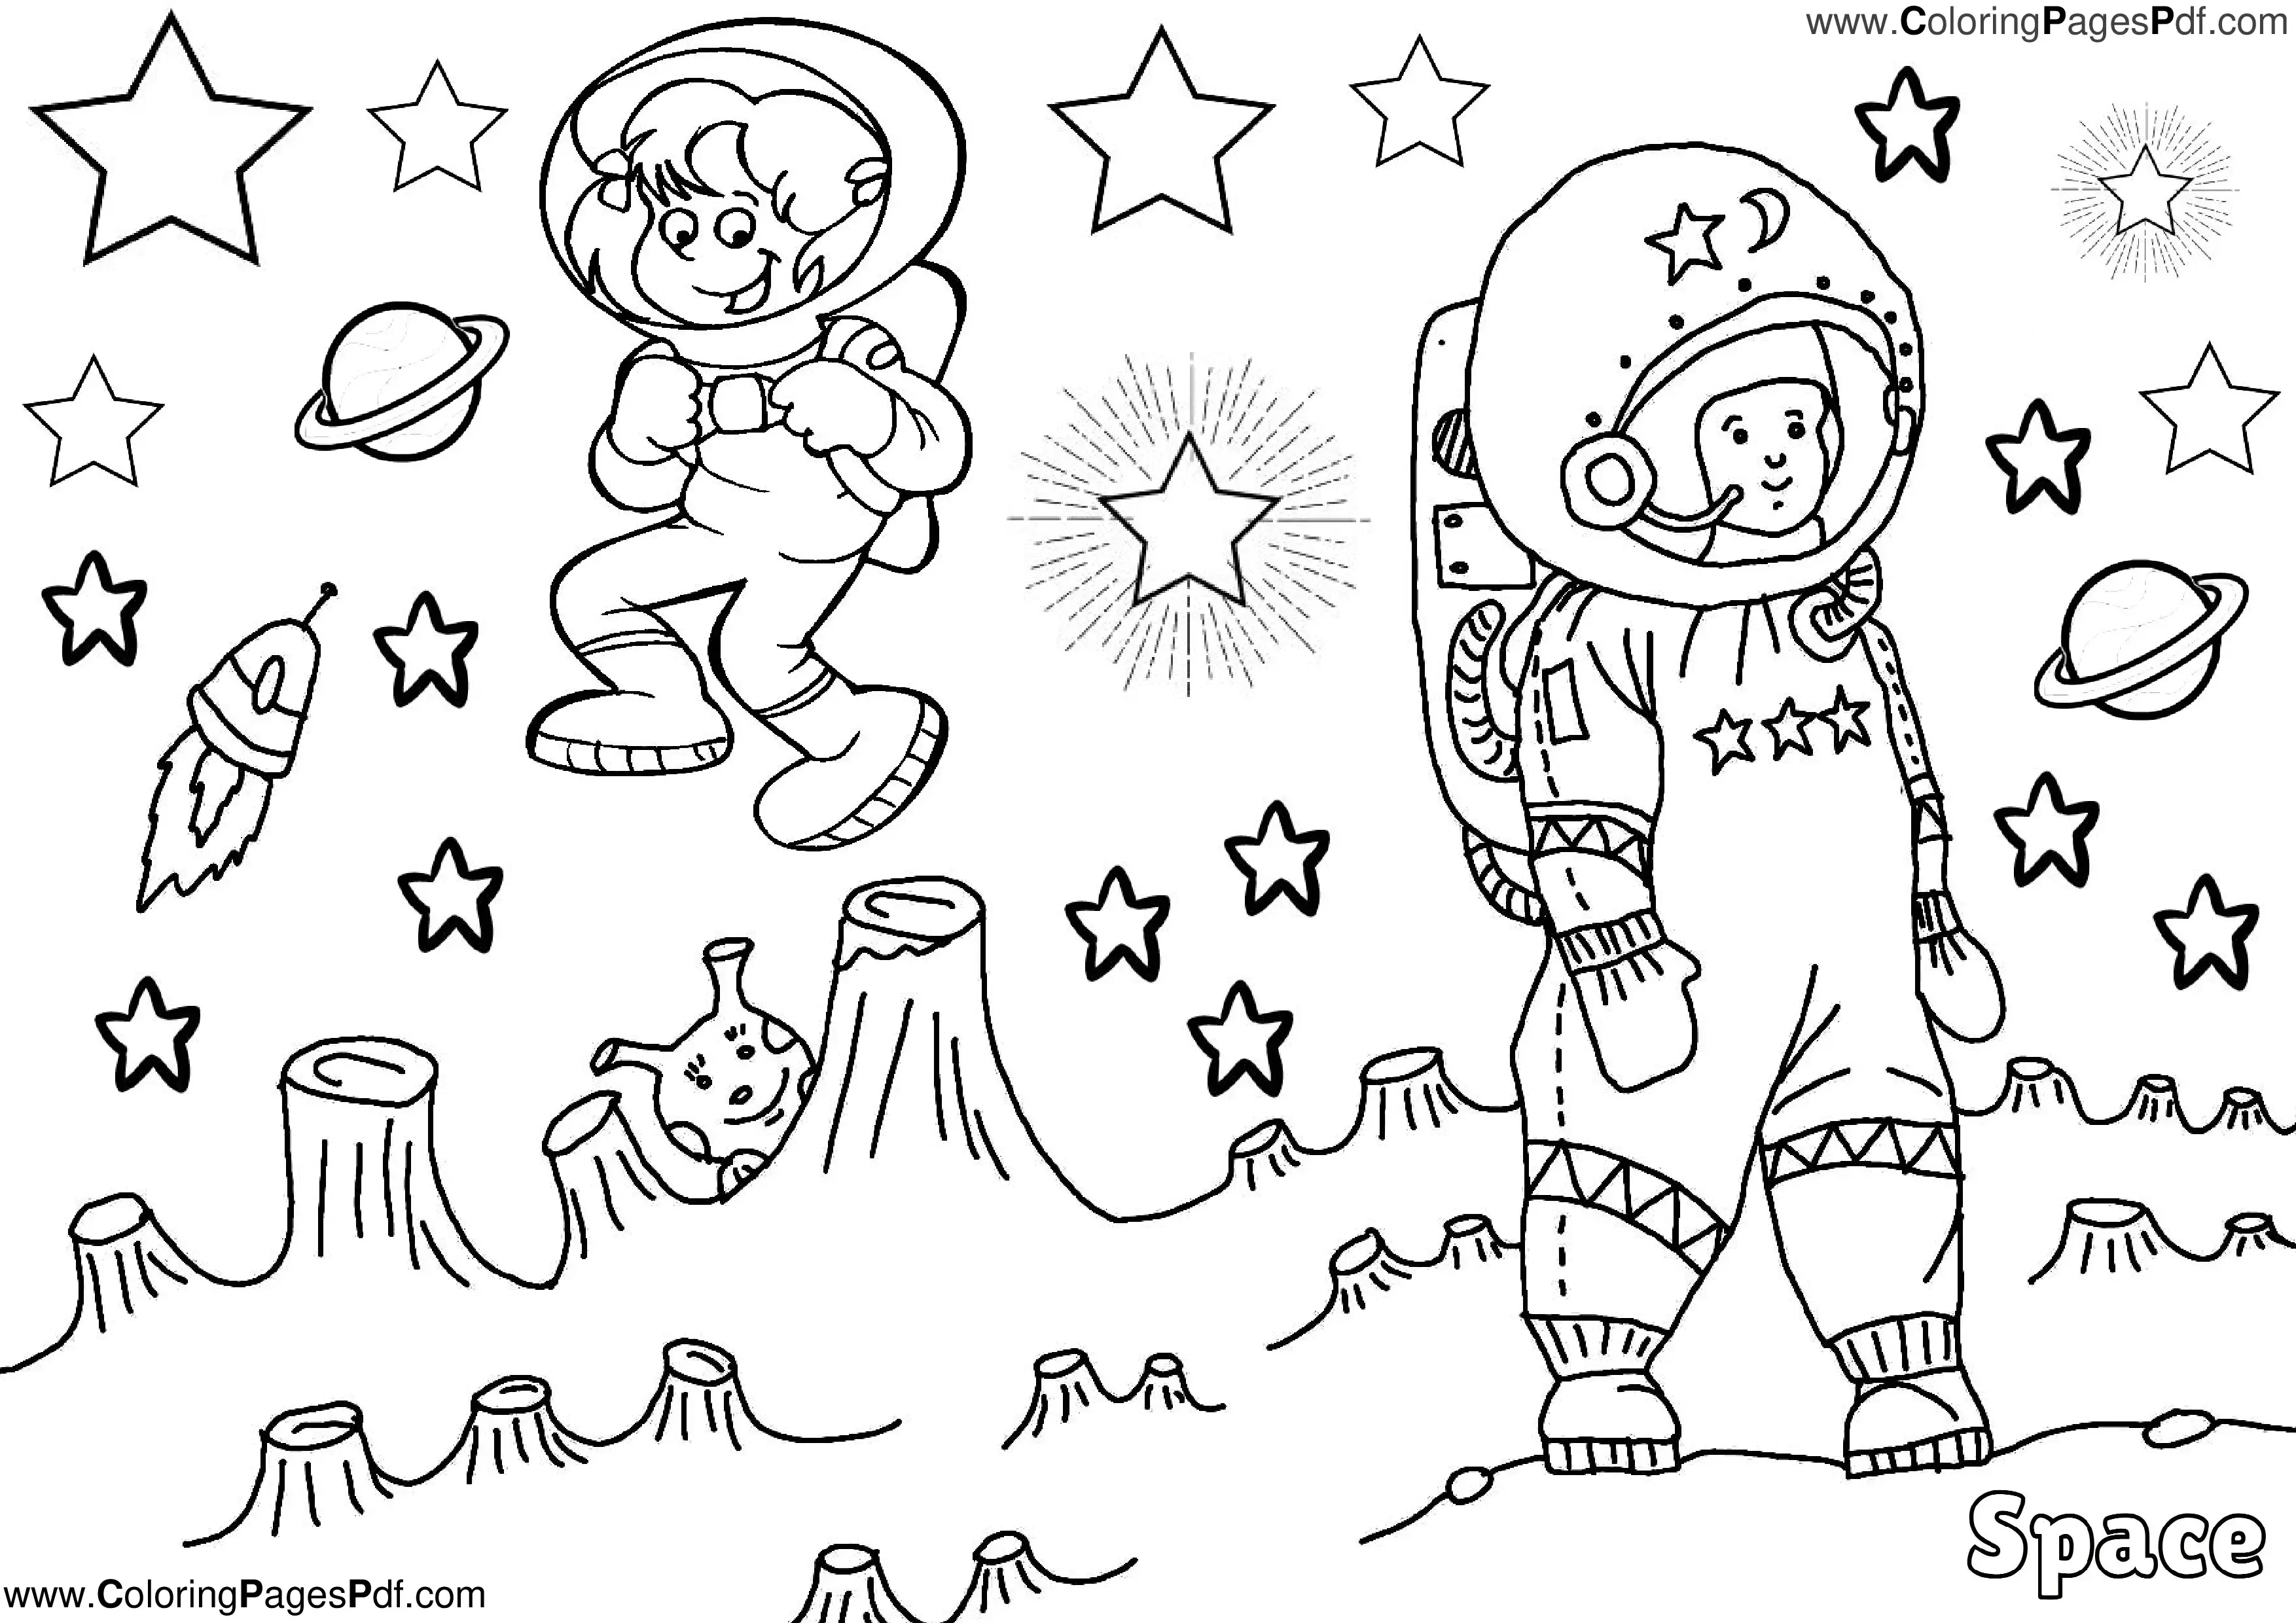 Space coloring pages for girls